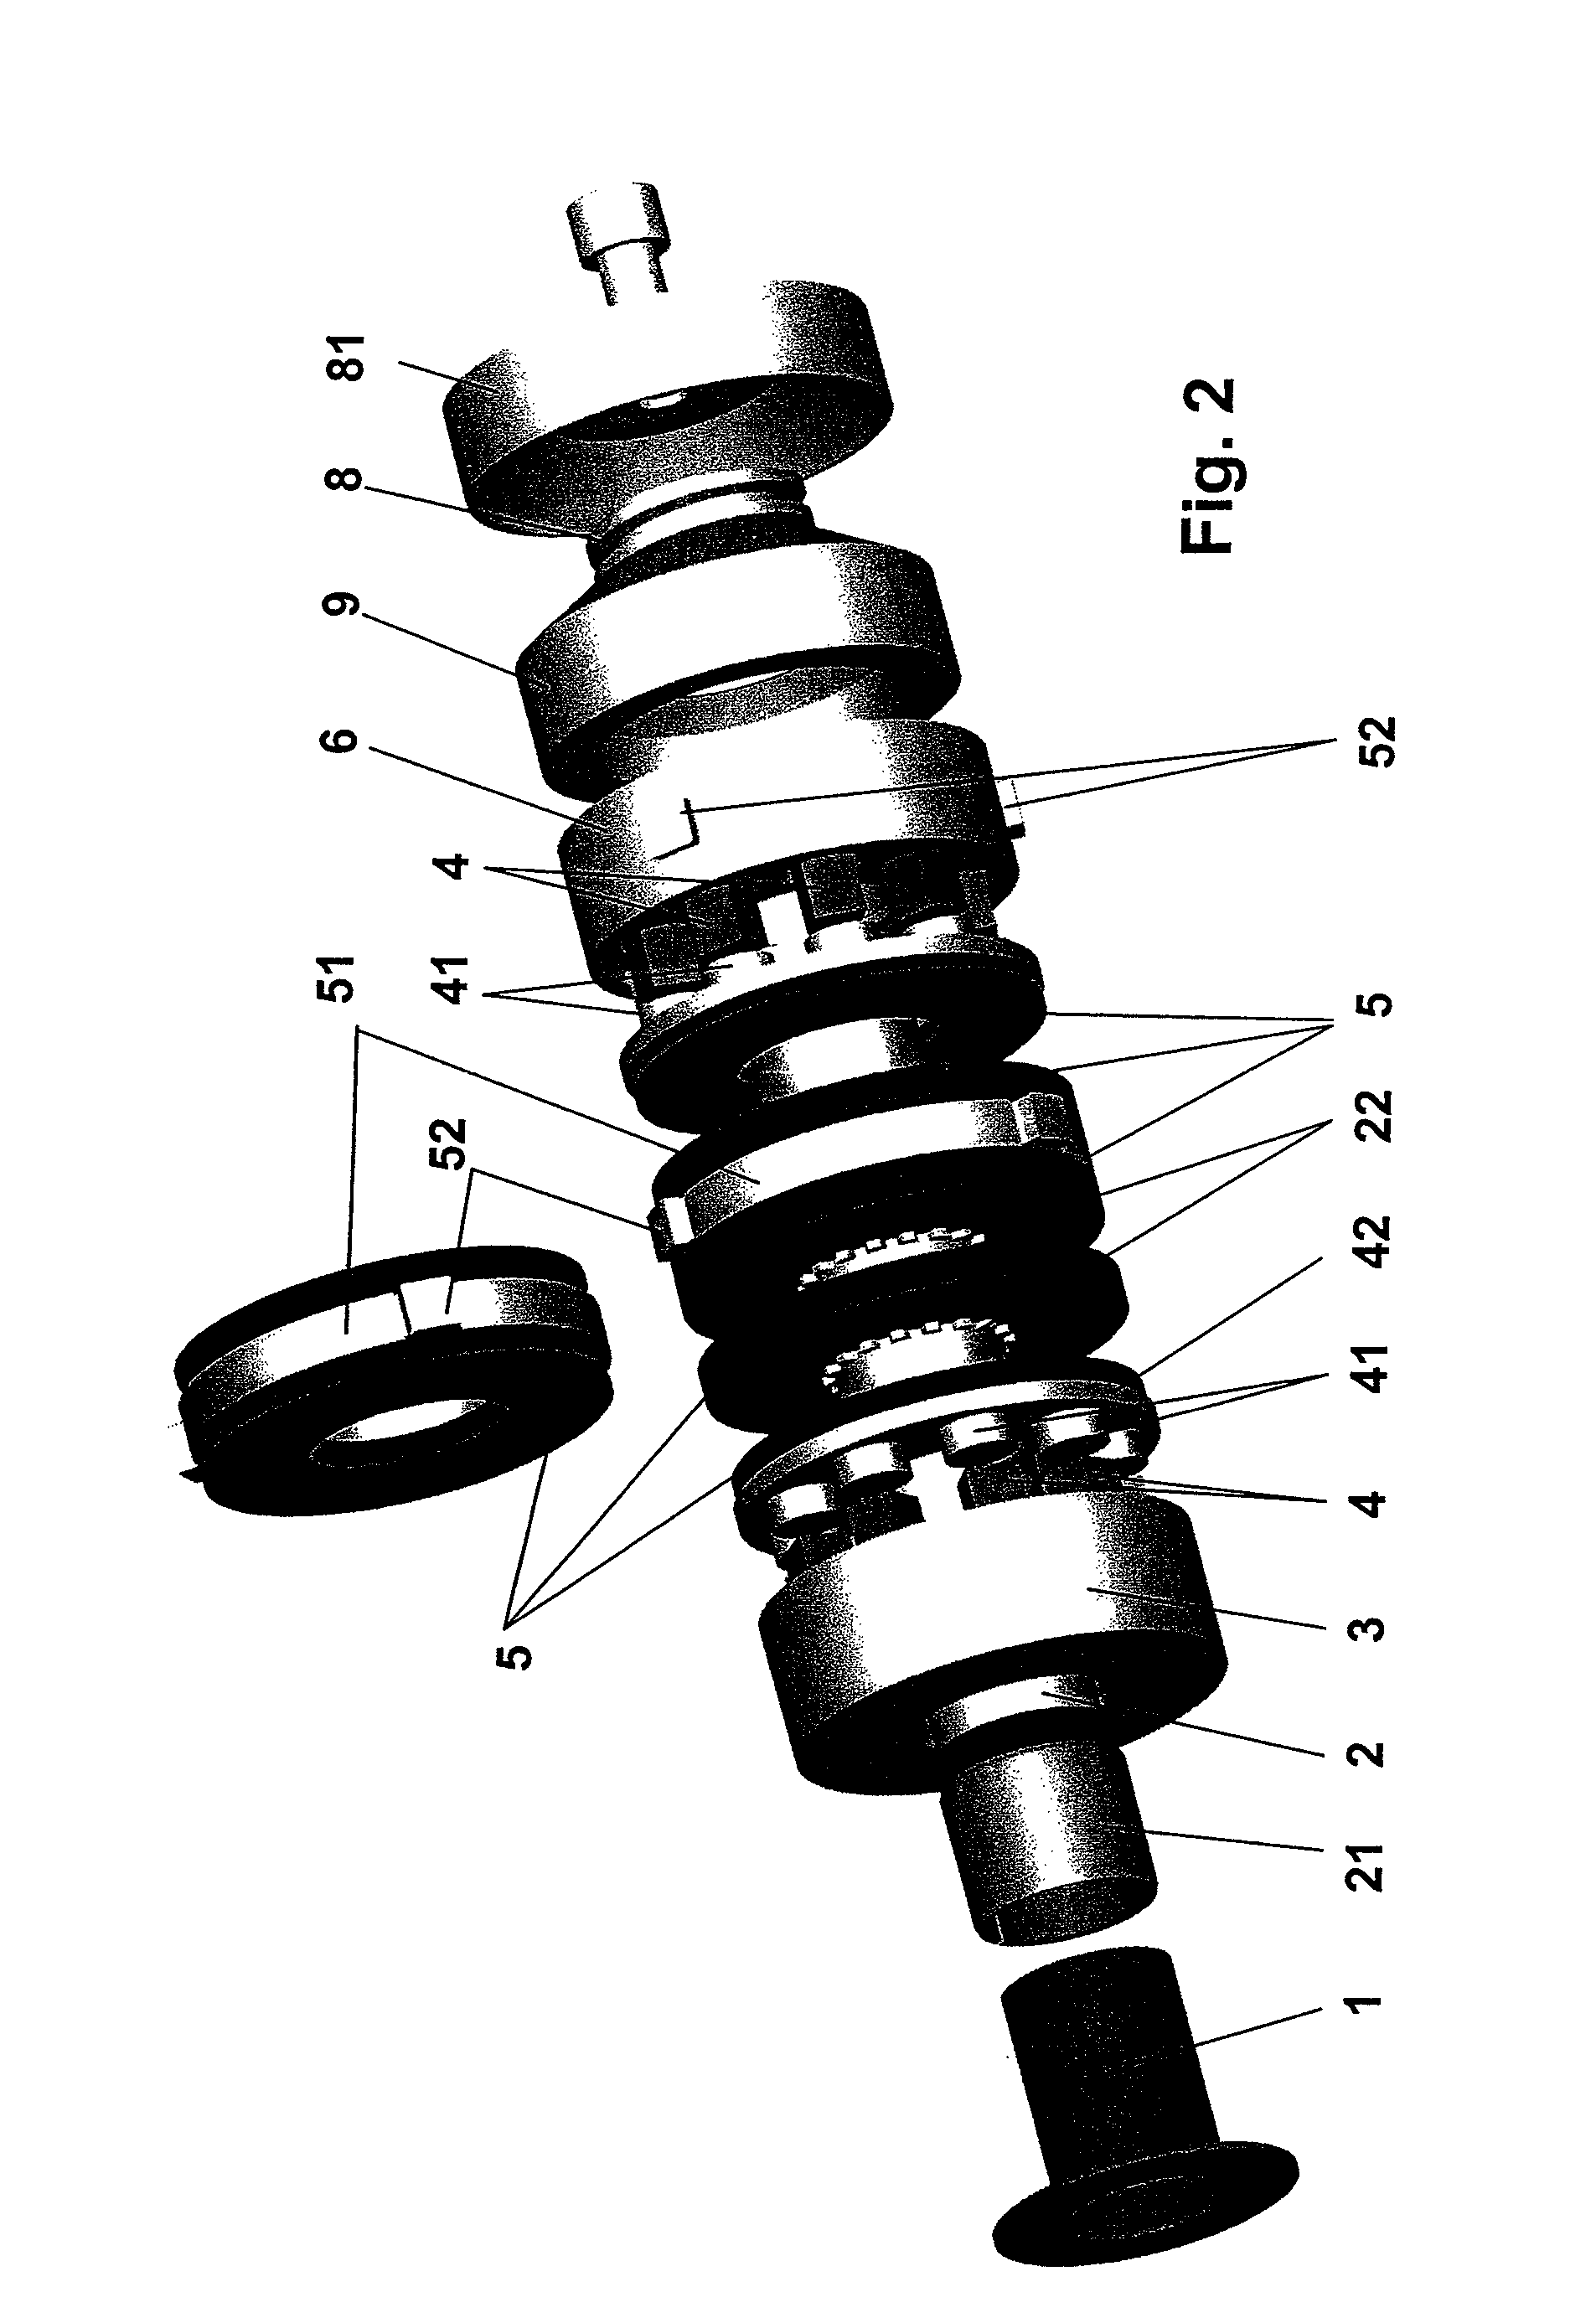 Device and method for tightening a safety belt serving to protect occupants in a vehicle